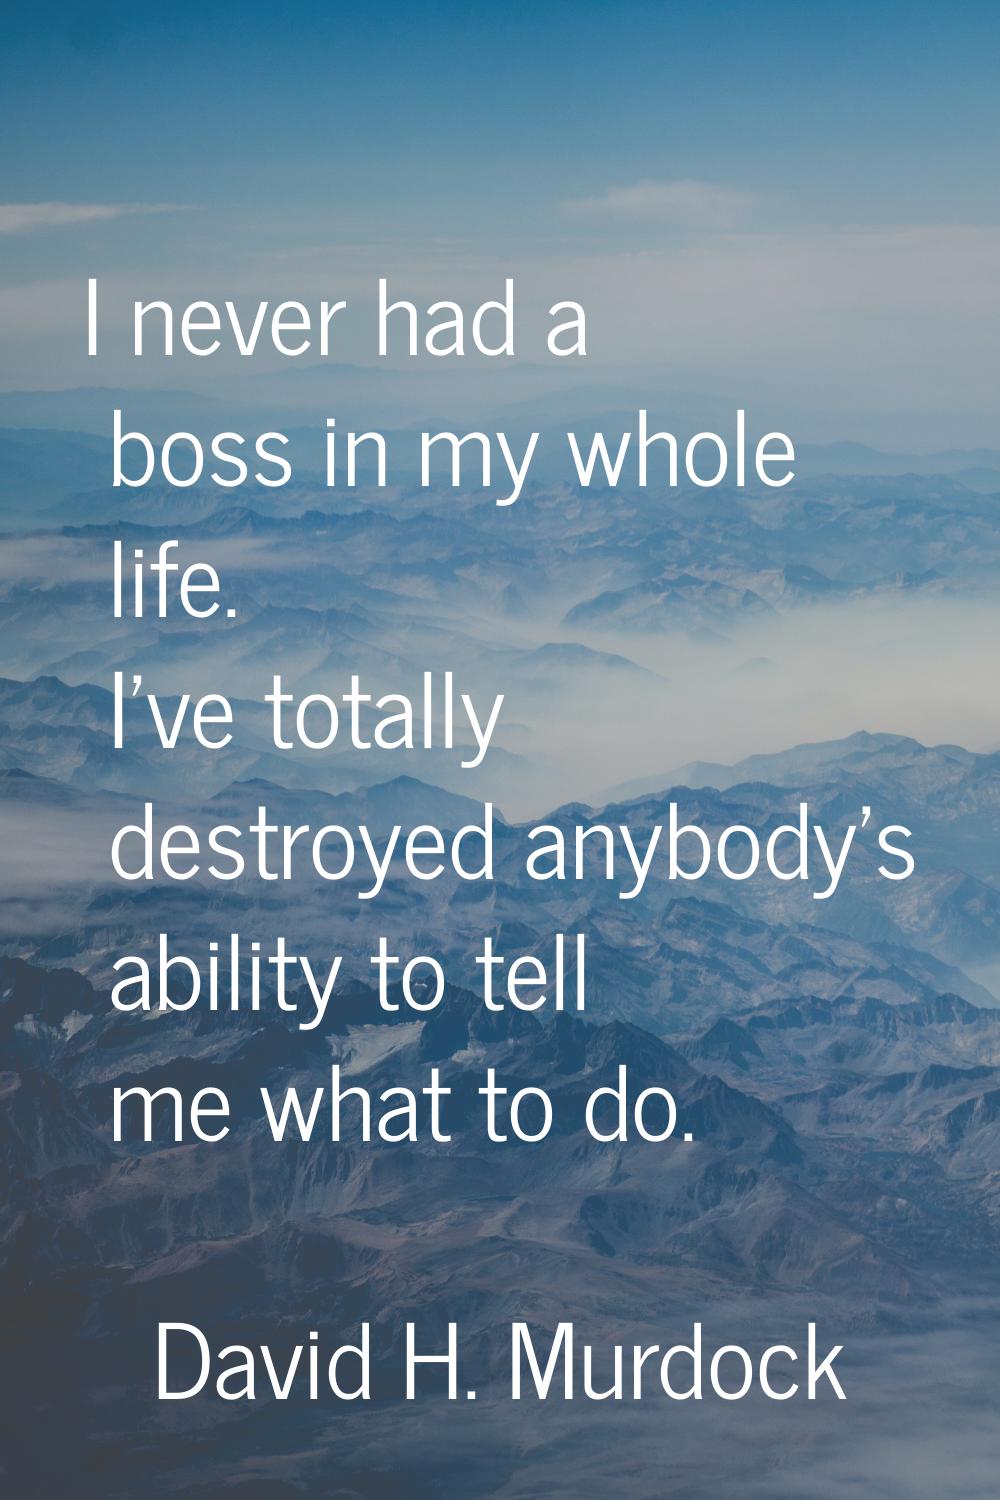 I never had a boss in my whole life. I've totally destroyed anybody's ability to tell me what to do